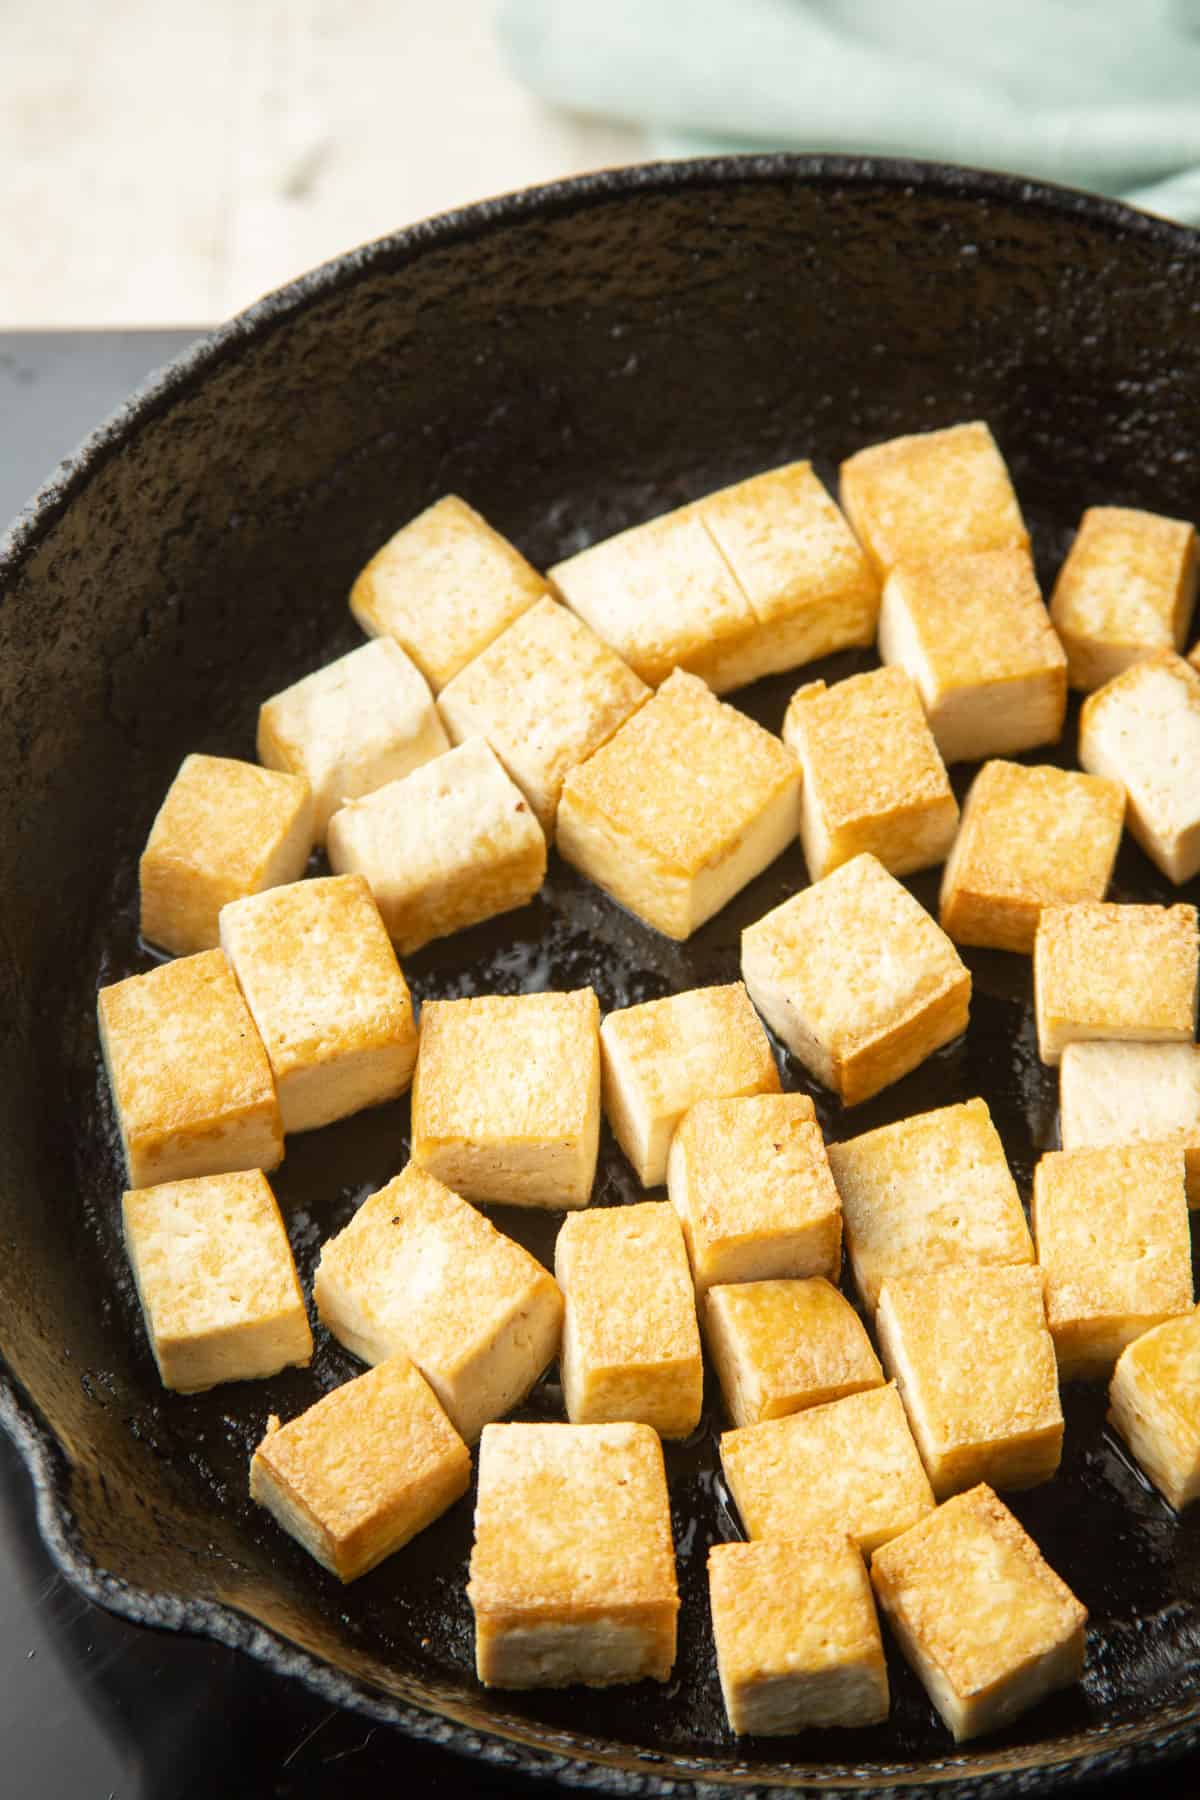 Tofu cubes are cooking in a wok.